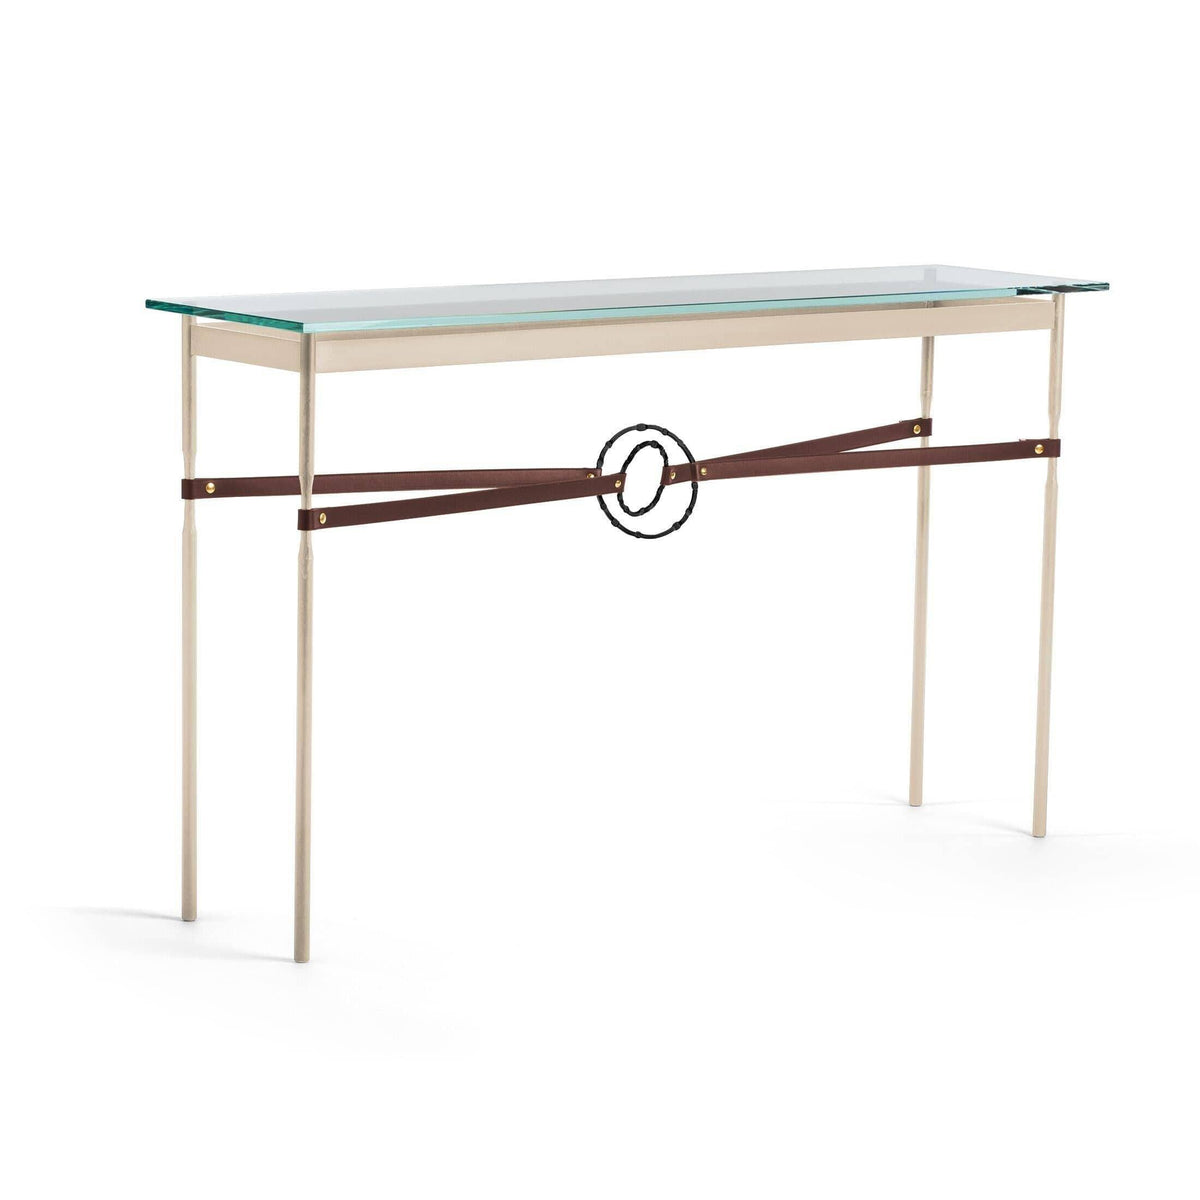 Hubbardton Forge - Equus Brown Leather Console Table - 750118-84-10-LB-VA0714 | Montreal Lighting & Hardware